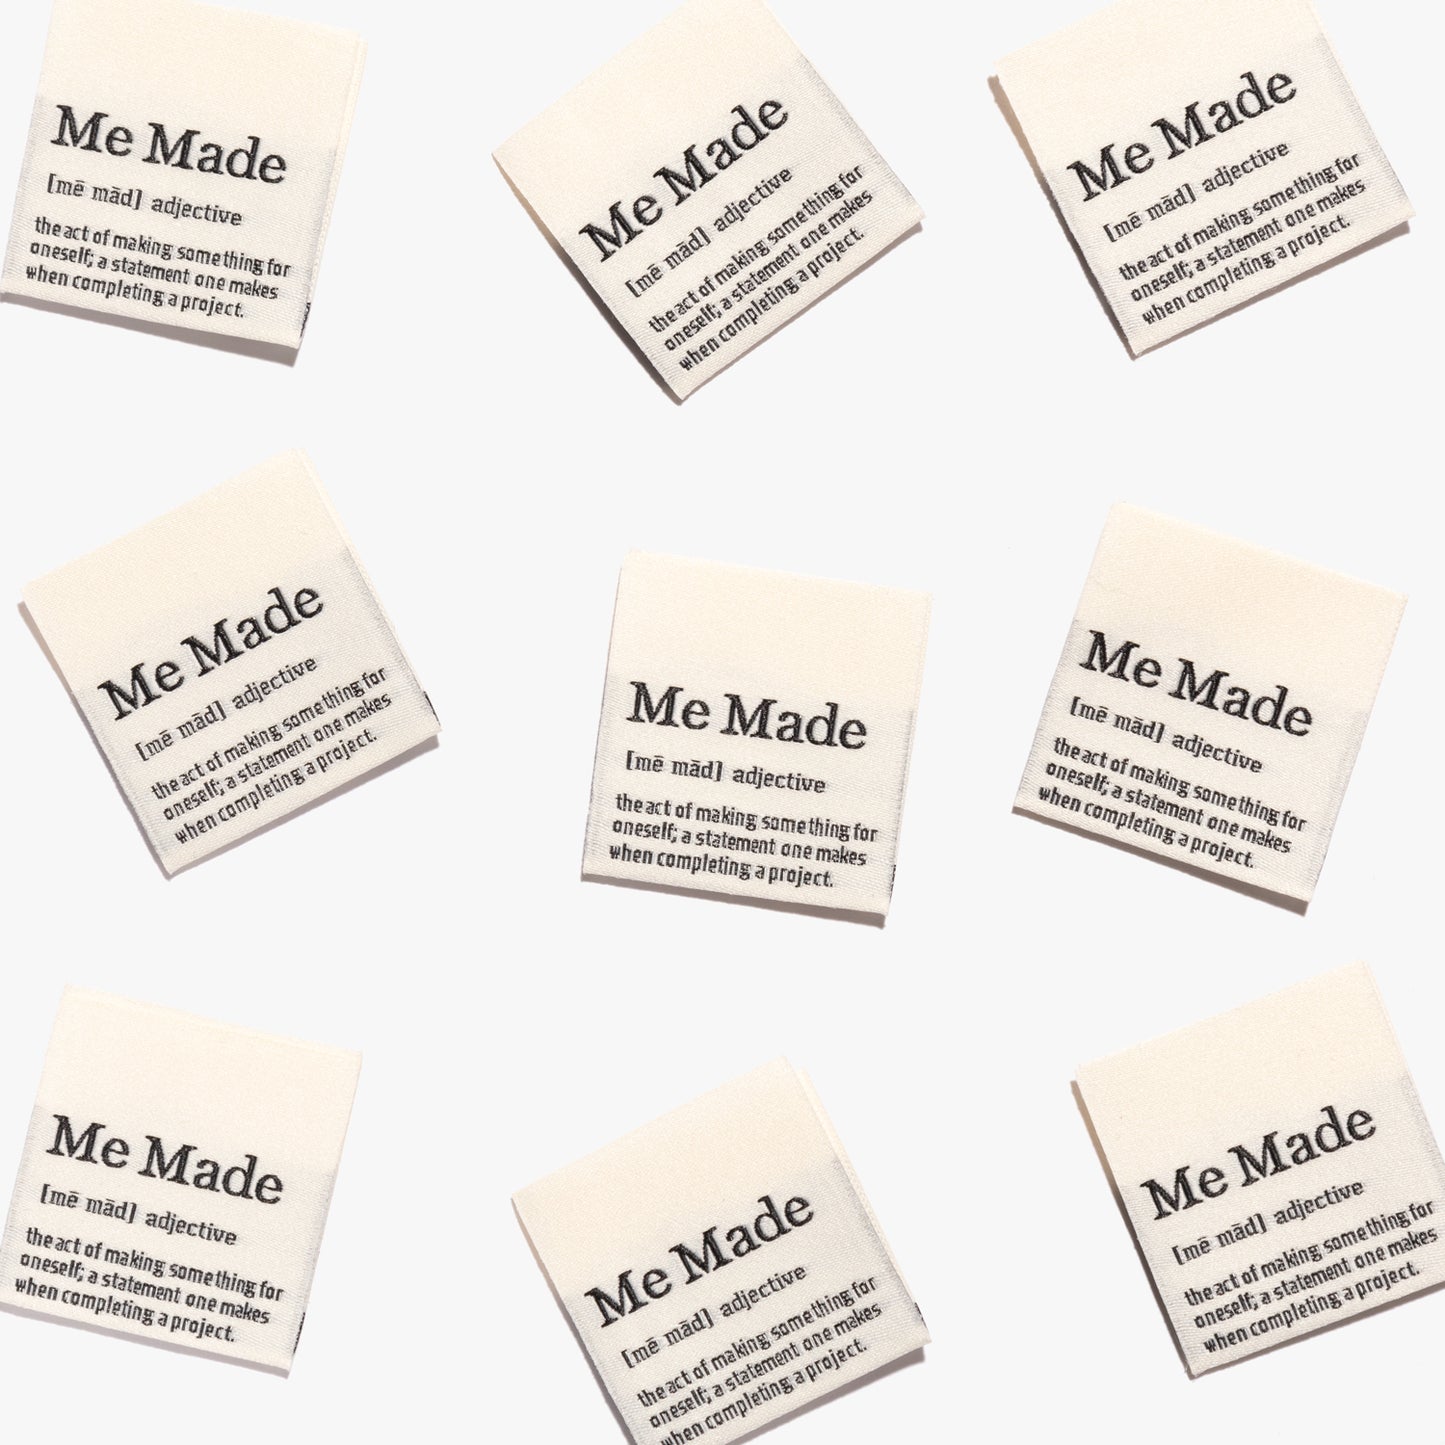 Kylie and the Machine - Woven labels - "Me Made" Definition